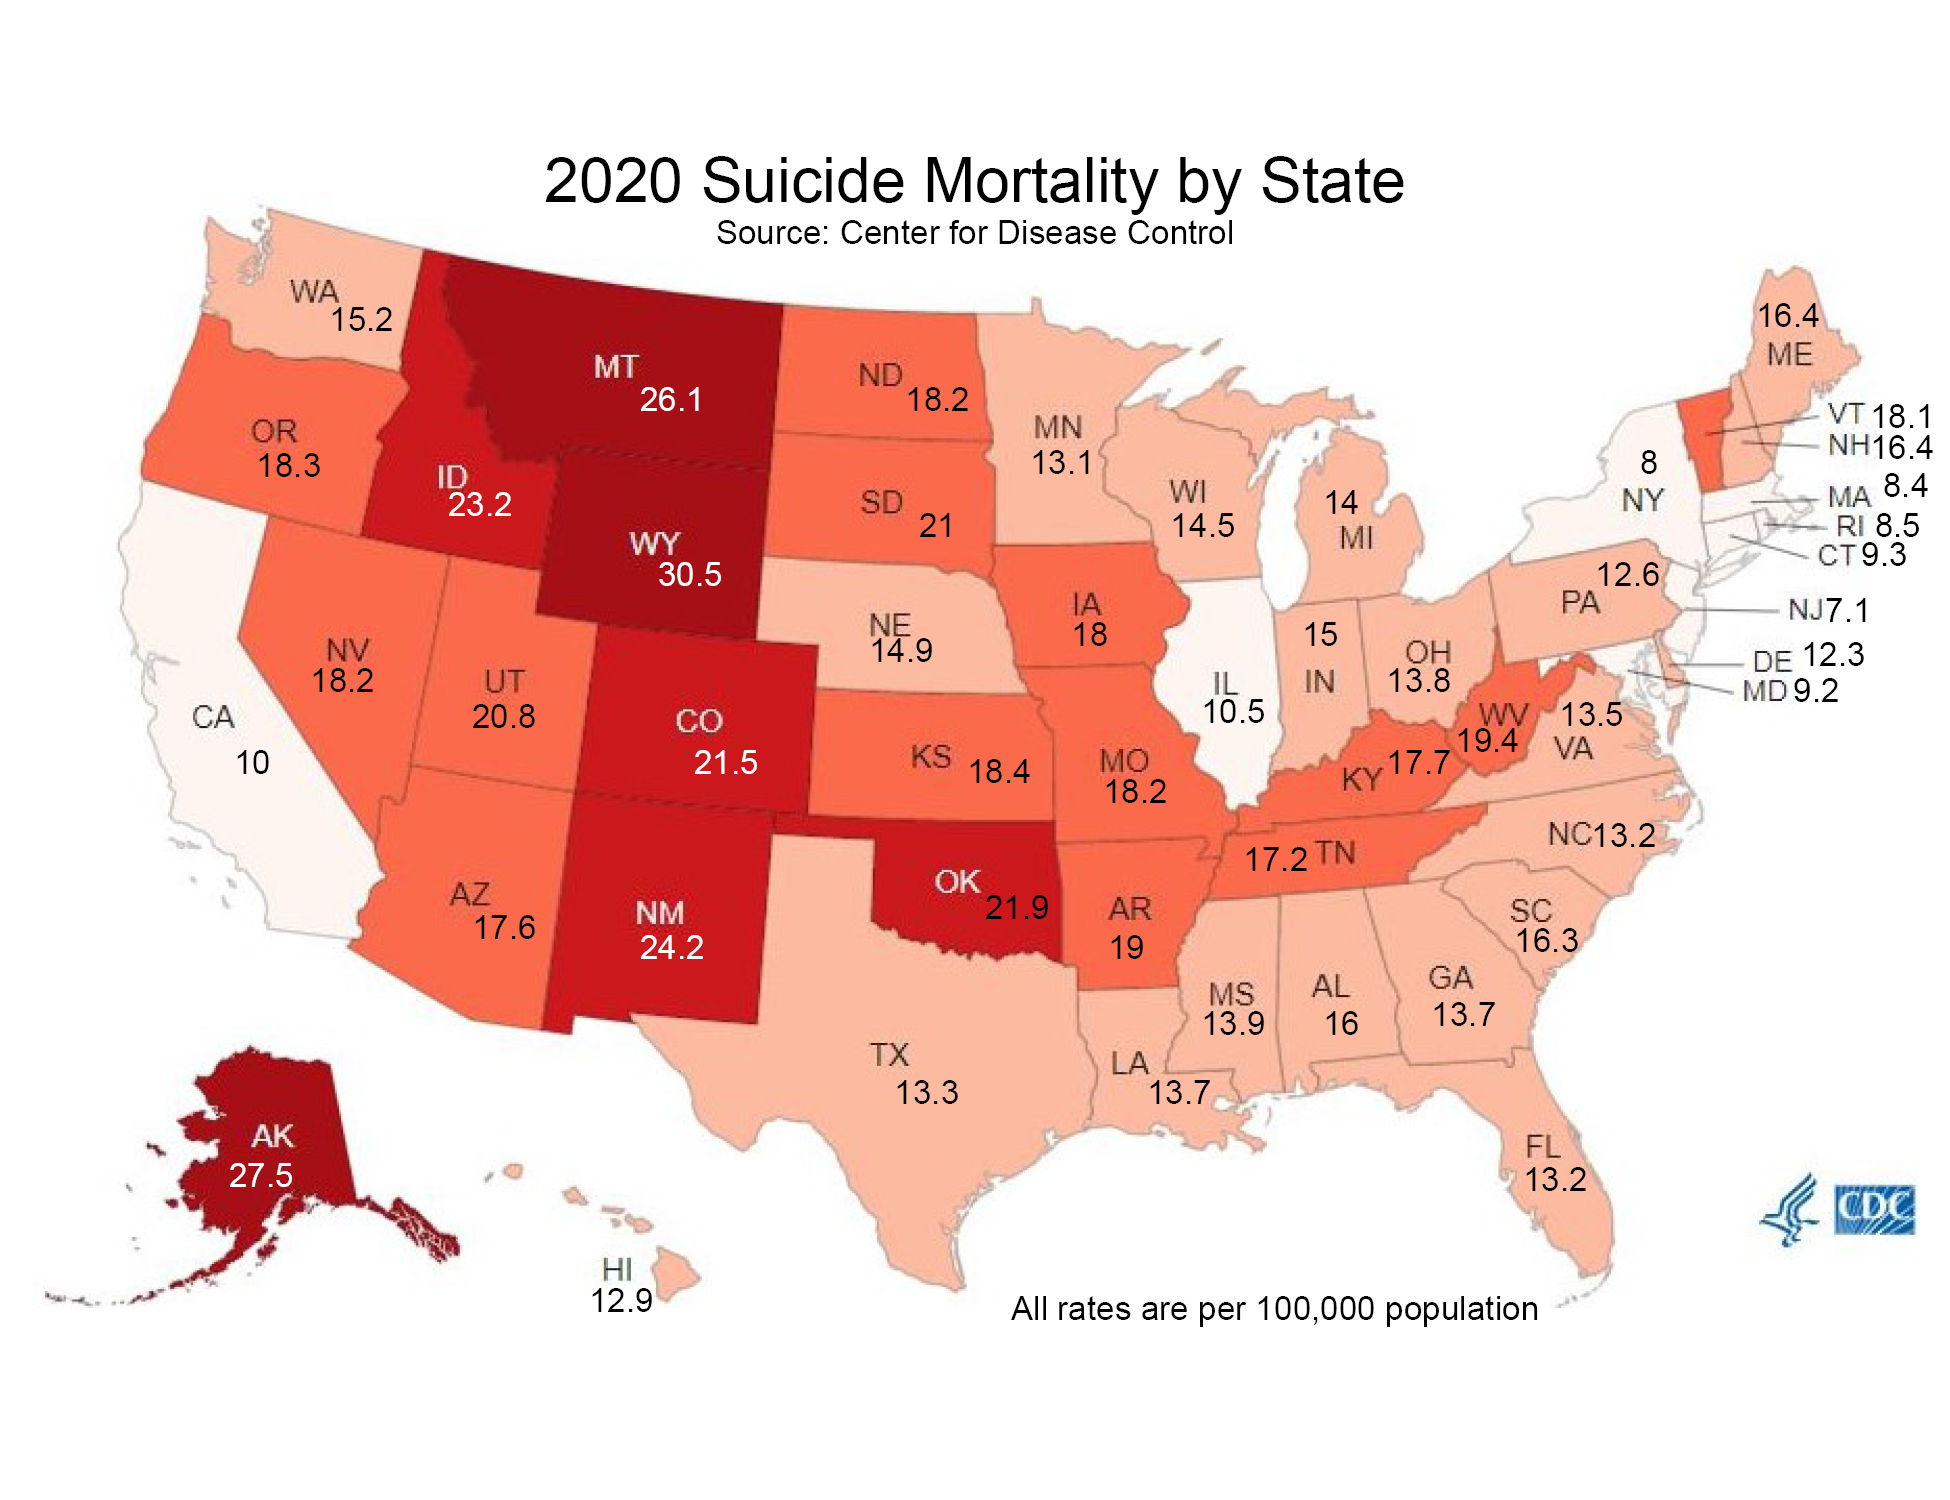 2020 Suicide Mortality by State; Source: Center of Disease Control; All rates are per 100,000 population; AL, 16; AK, 27.5; AZ, 17.6; AR, 19; CA, 10; CO, 21.5; CT, 9.3; DE, 12.3; FL, 13.2; GA, 13.7; HI, 12.9; ID, 23.2; IL, 10.5; IN, 15; IA, 18; KS, 18.4; KY, 17.7; LA, 13.7; ME, 16.4; MD, 9.2; MA, 8.4; MI, 14; MN, 13.1; MS, 13.9; MO, 18.2; MT, 26.1; NE, 14.9; NV, 18.2; NH, 16.4; NJ, 7.1; NM, 24.2; NY, 8; NC, 13.2; ND, 18.2; OH, 13.8; OK, 21.9; OR, 18.3; PA, 12.6; RI, 8.5; SC, 16.3; SD, 21; TN, 17.2; TX, 13.3; UT, 20.8; VT, 18.1; VA, 13.5; WA, 15.2; WV, 19.4; WI, 14.5; WY, 30.5